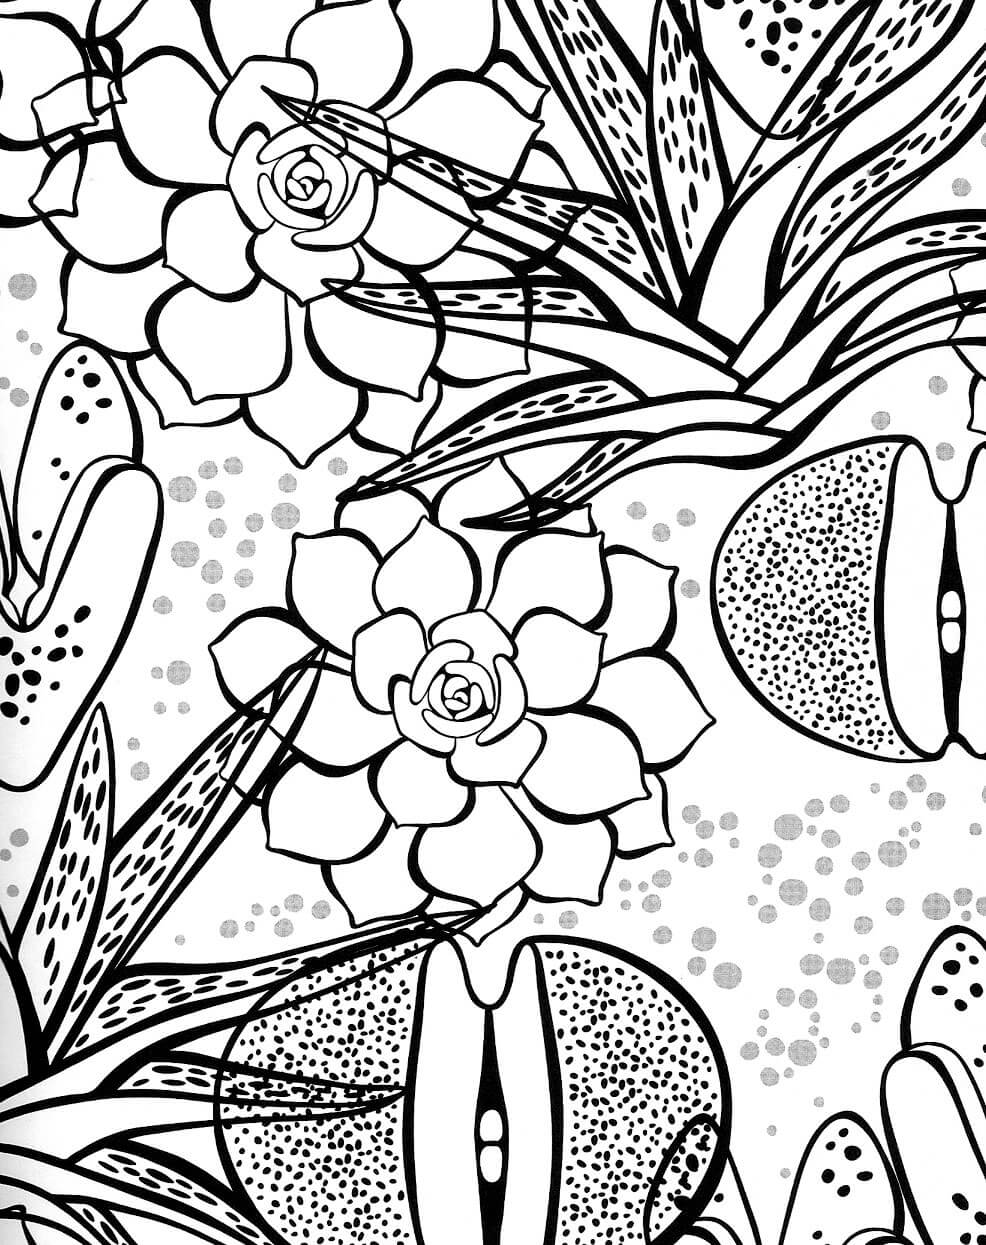 Succulents Coloring Page